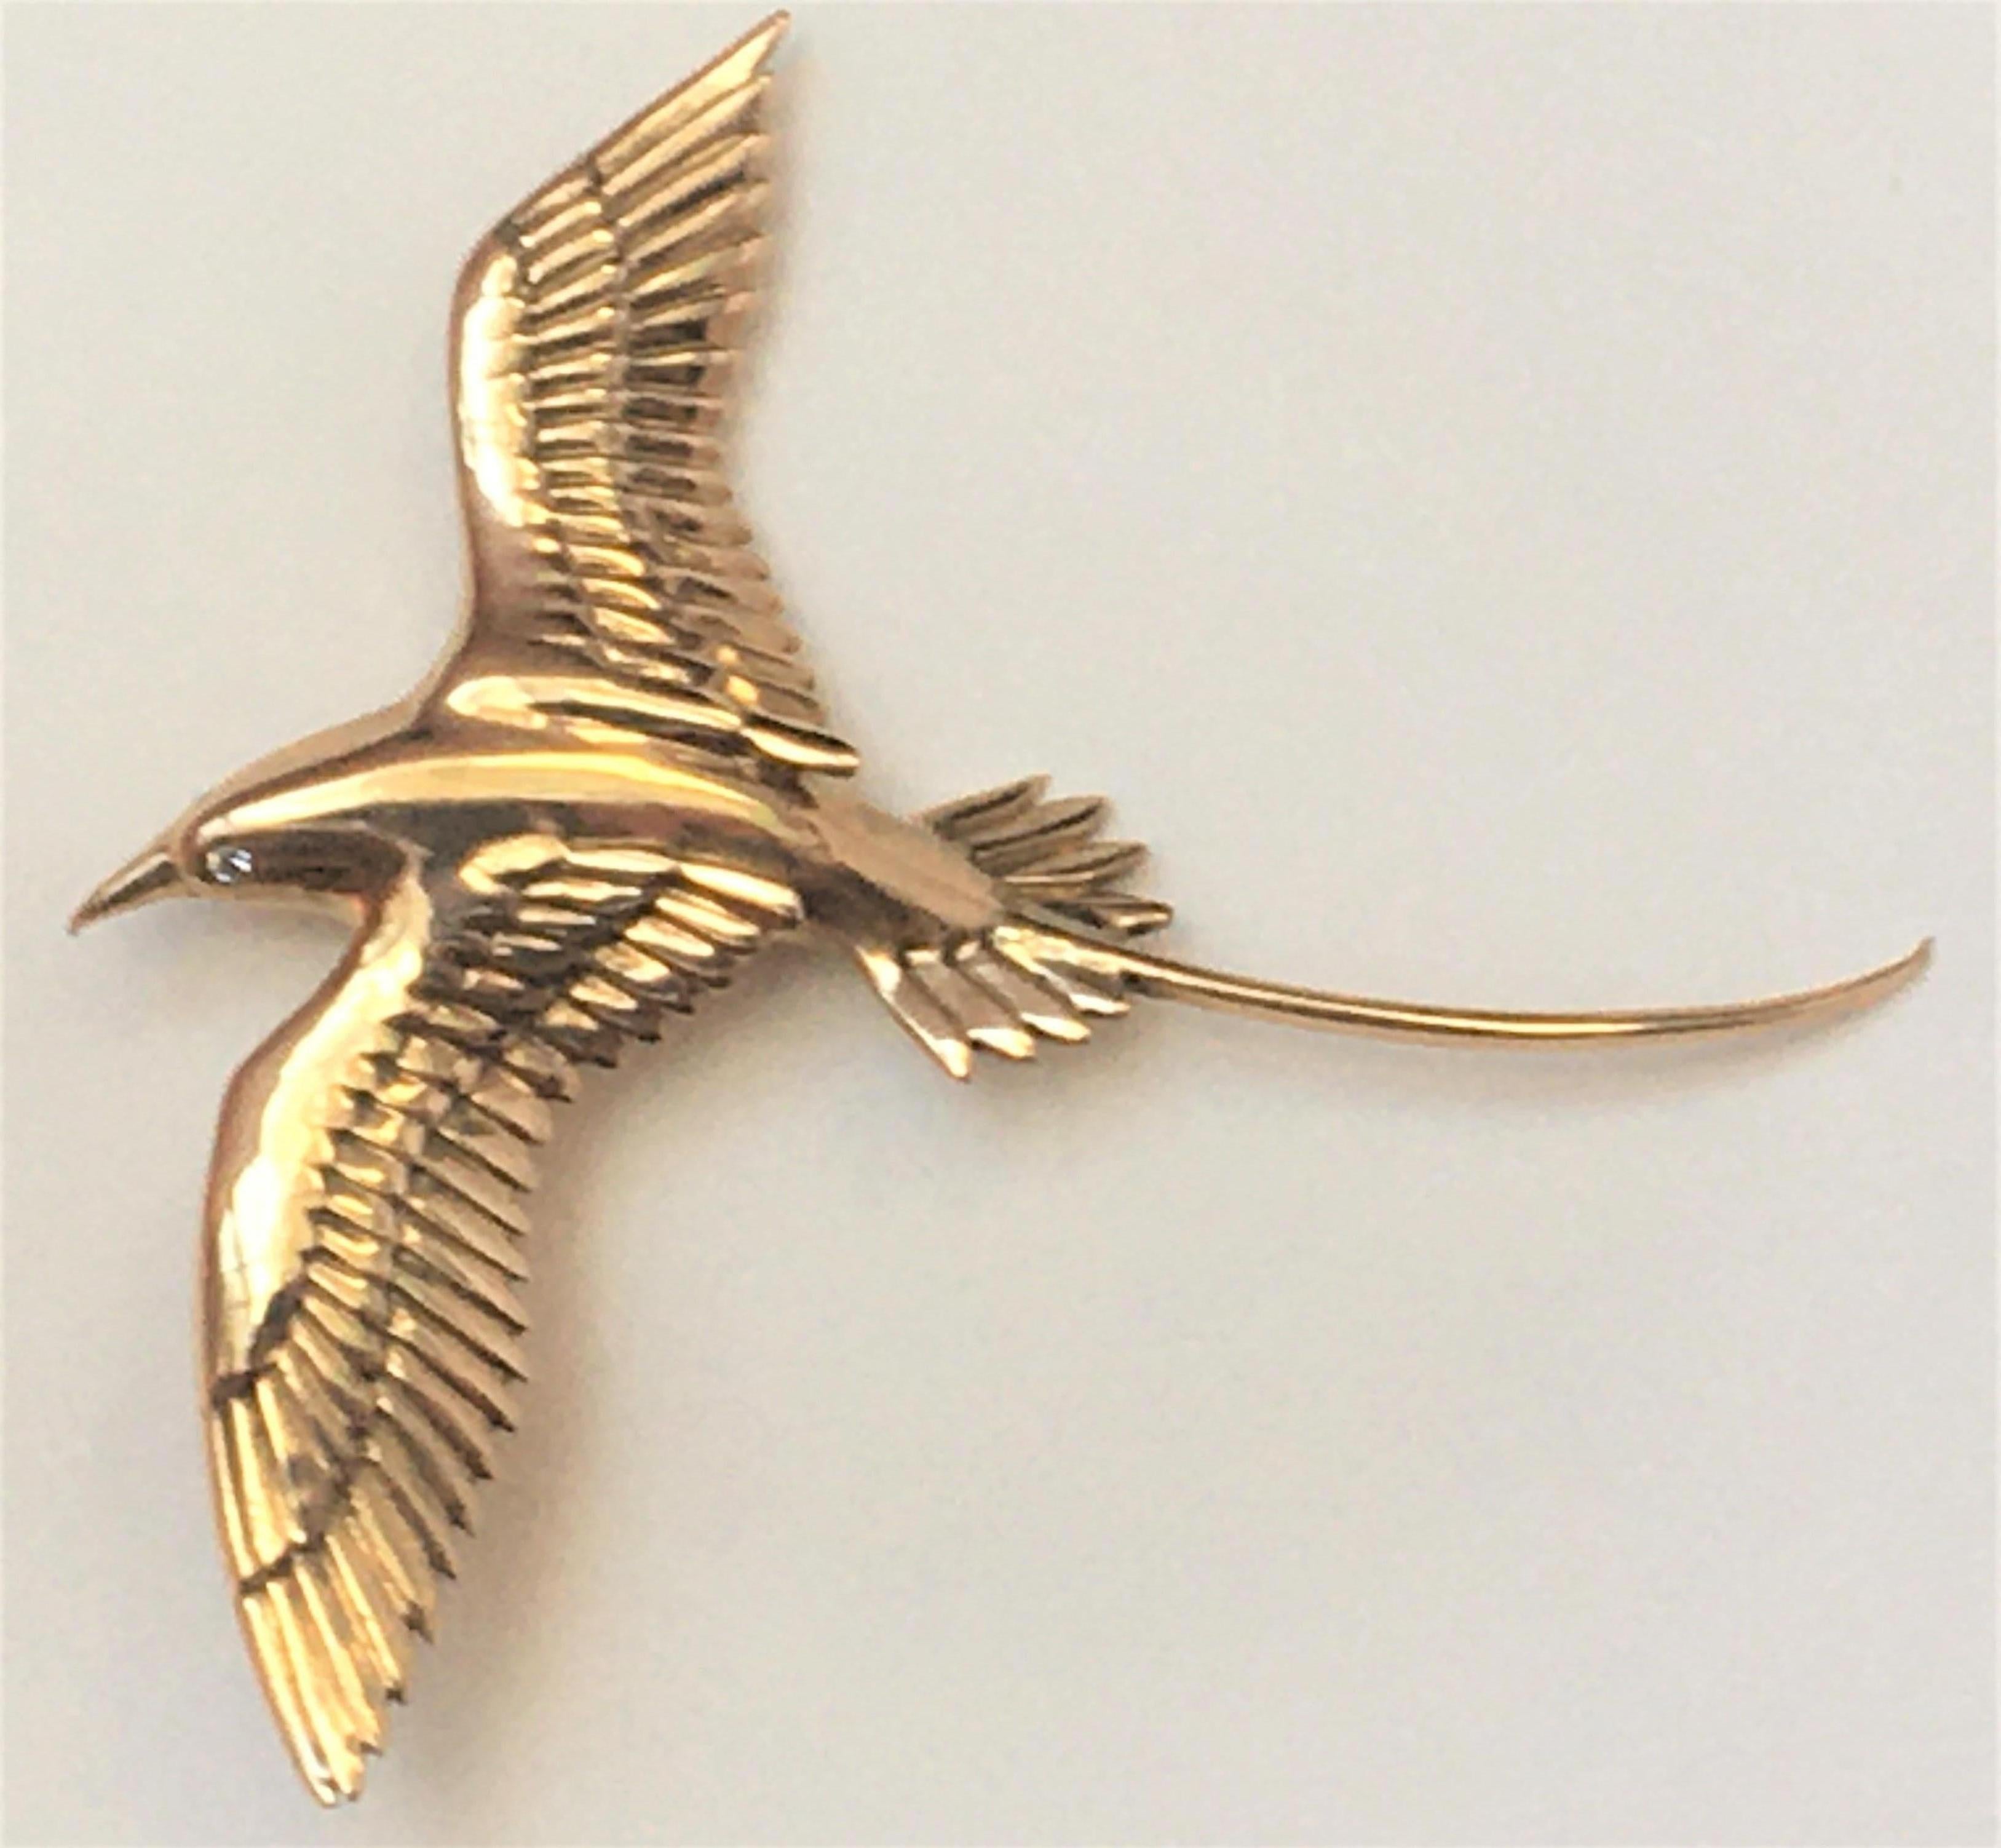 This gorgeous bird will be the highlight of any outfit!
14 karat yellow gold bird in flight with long tail
2 small round diamonds for eyes
Brooch is approximately 2.375 inches (beak to tail)  X 2.375 inches (wing span)
Hinged pin with safety  